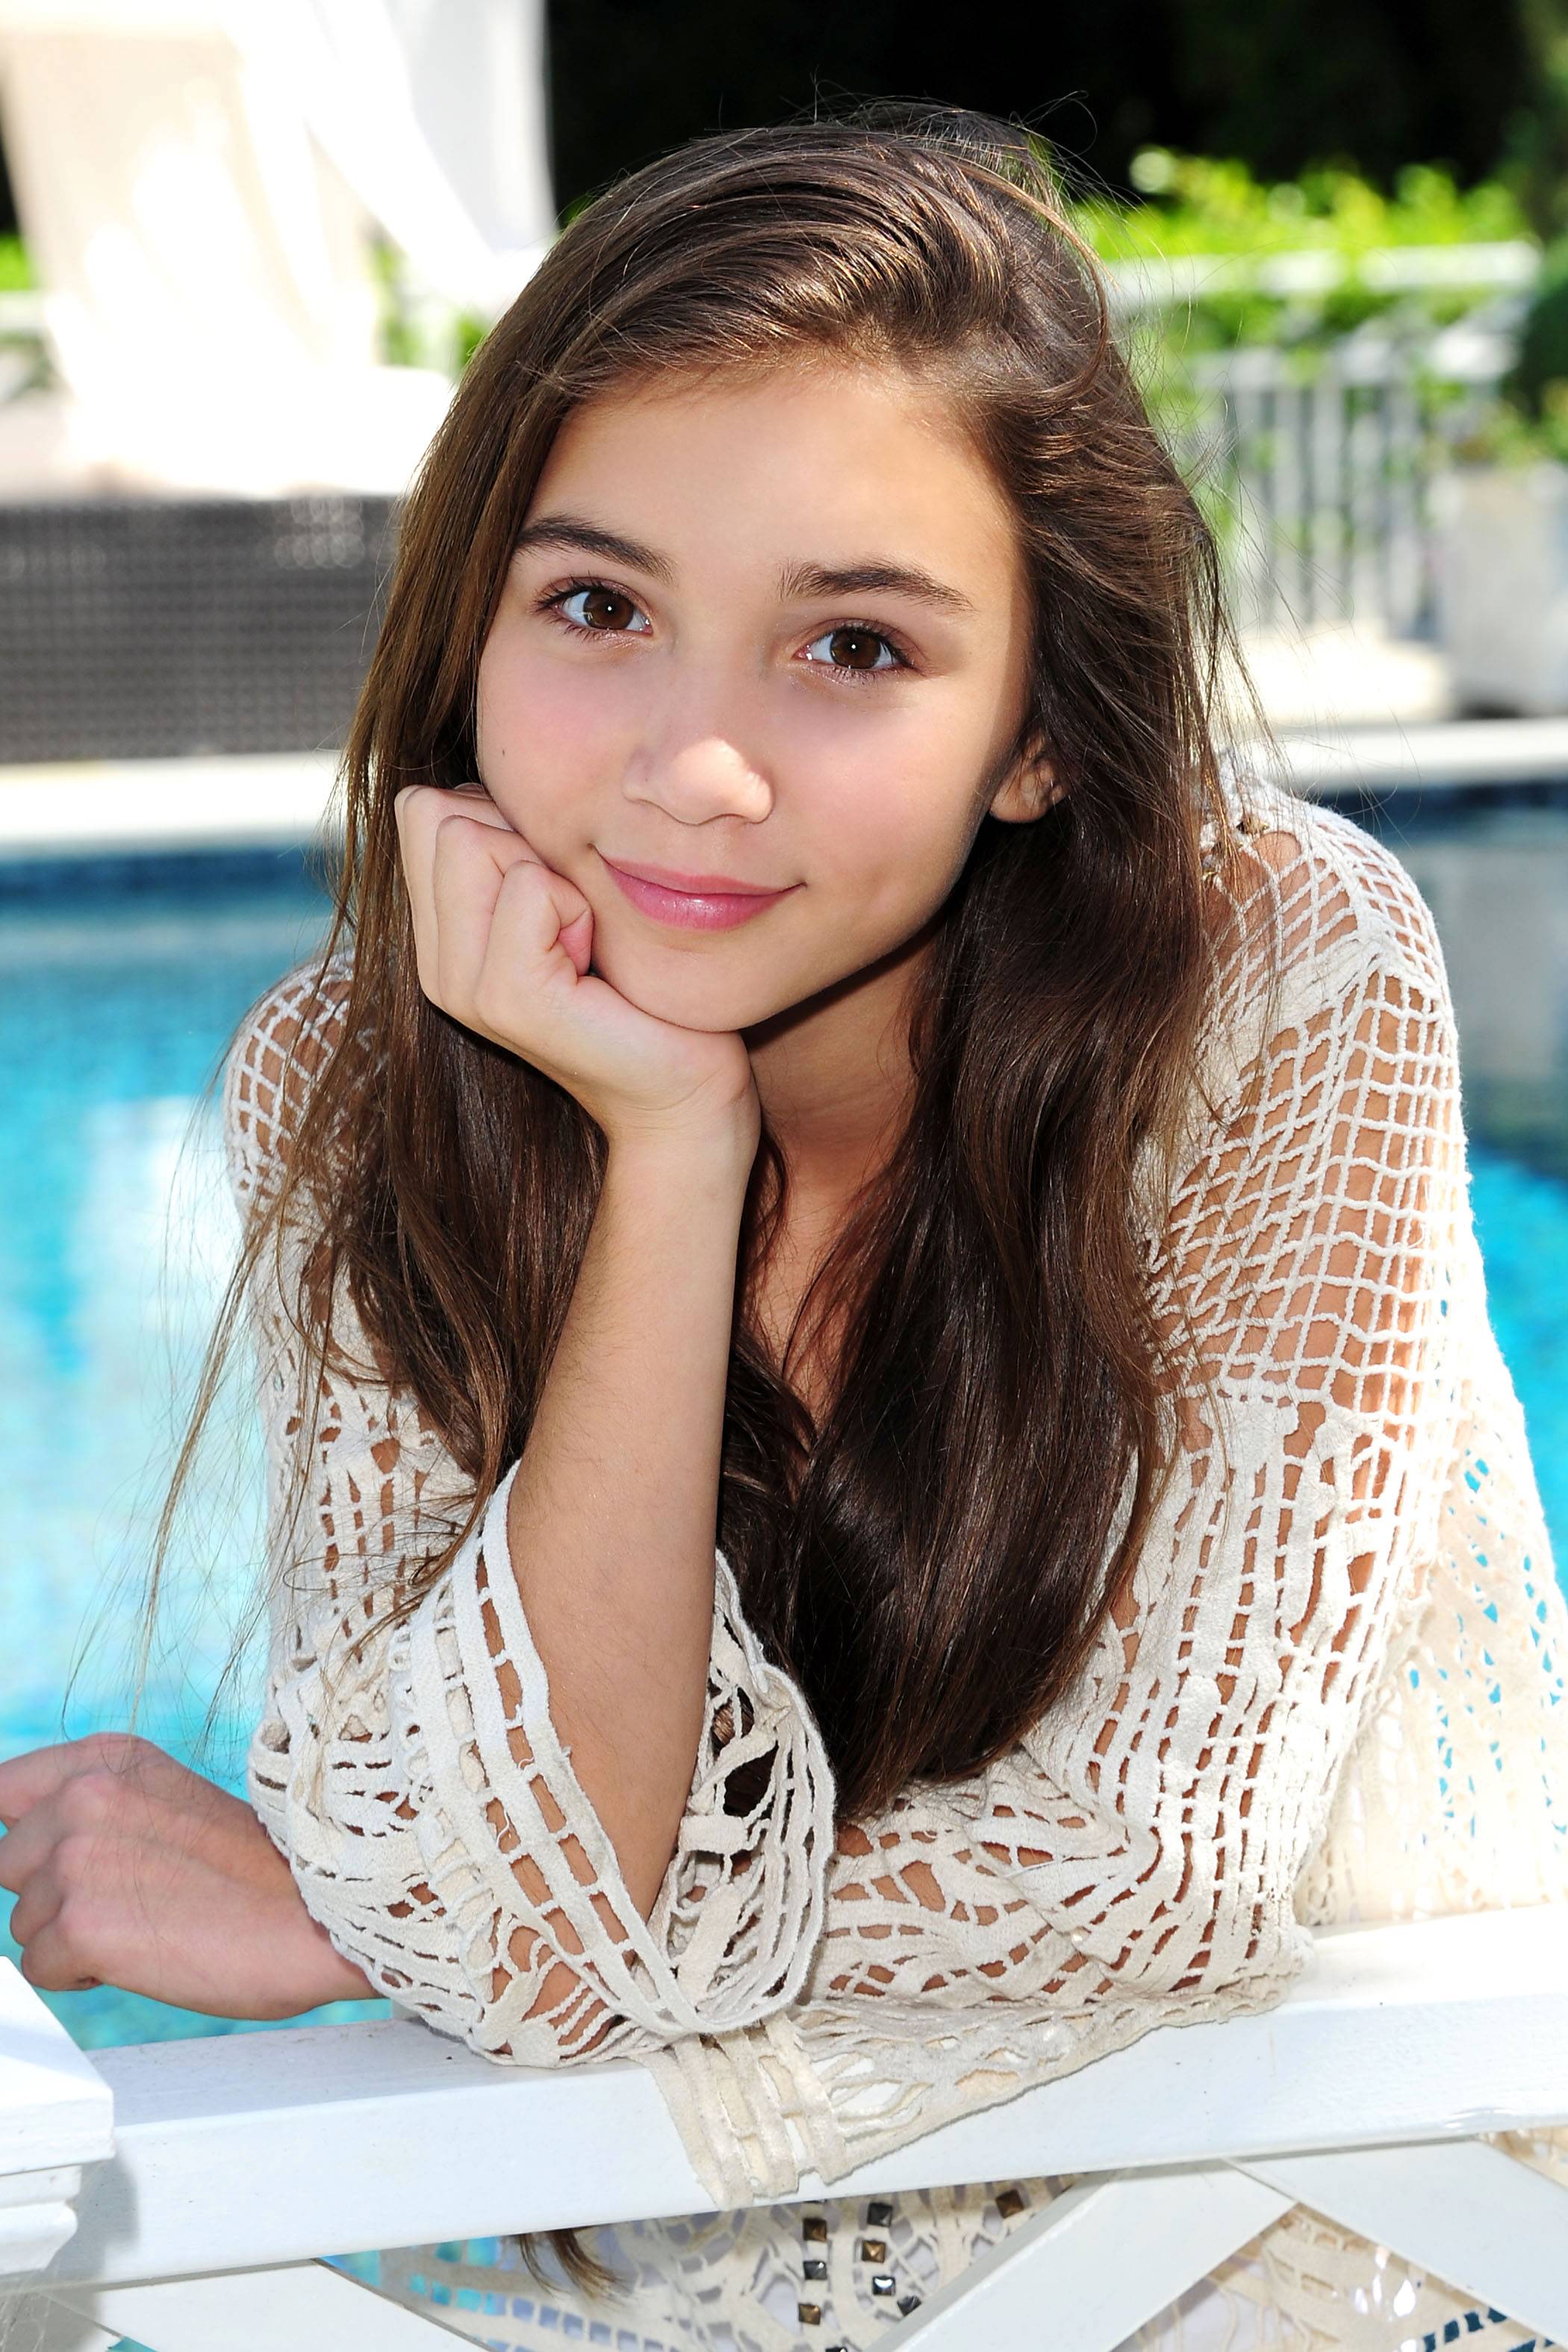 Picture of Rowan Blanchard, Picture Of Celebrities